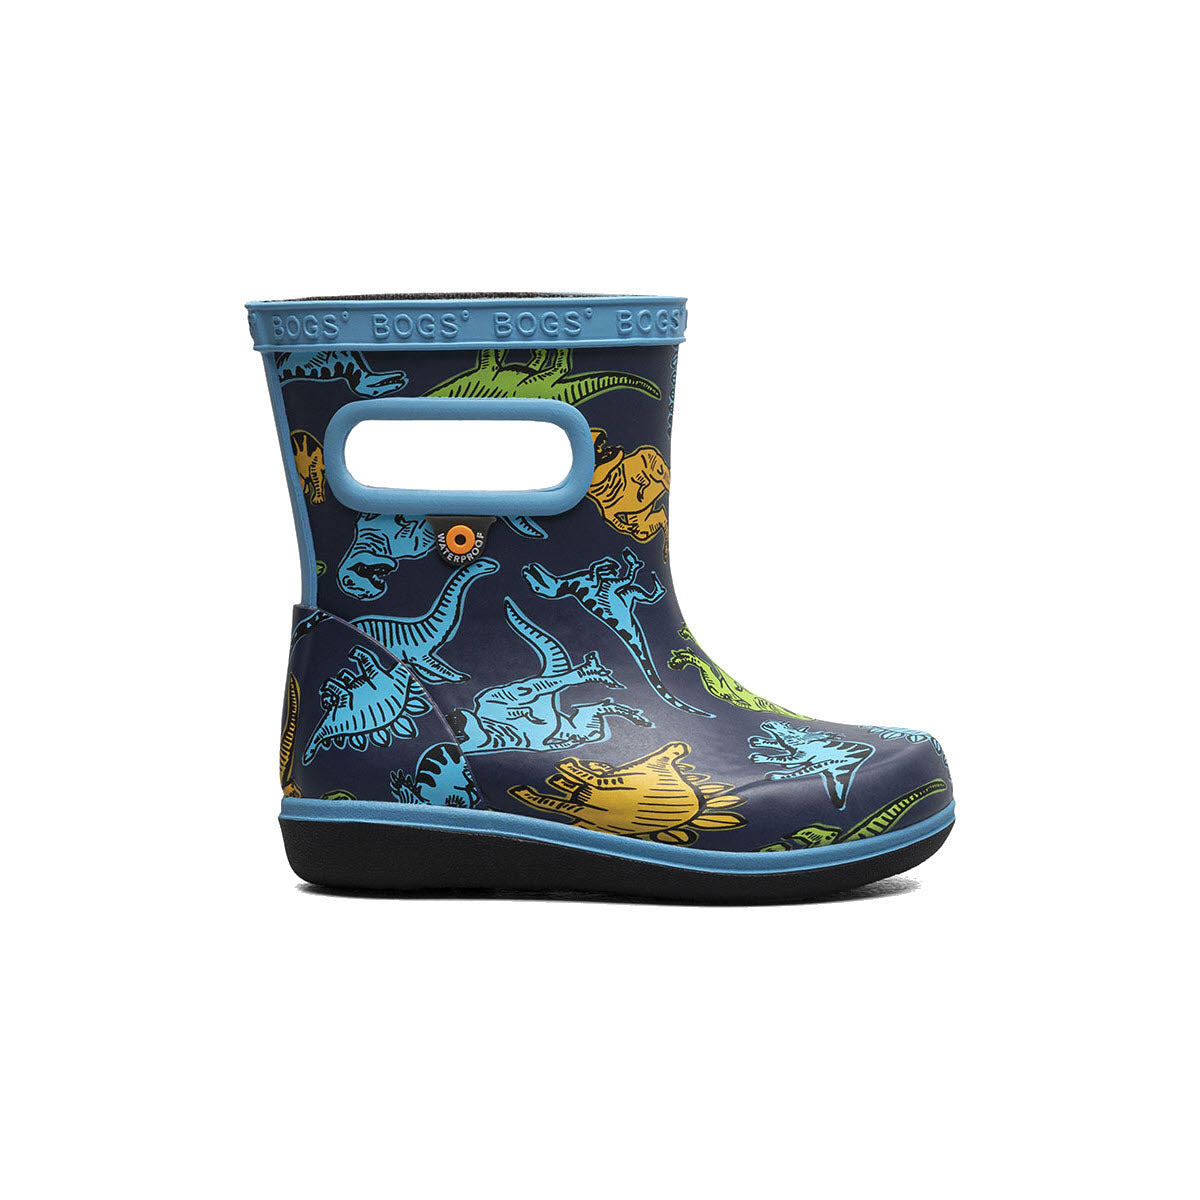 Bogs Kids&#39; waterproof boots with a dinosaur pattern in shades of blue, yellow, and green on a white background.